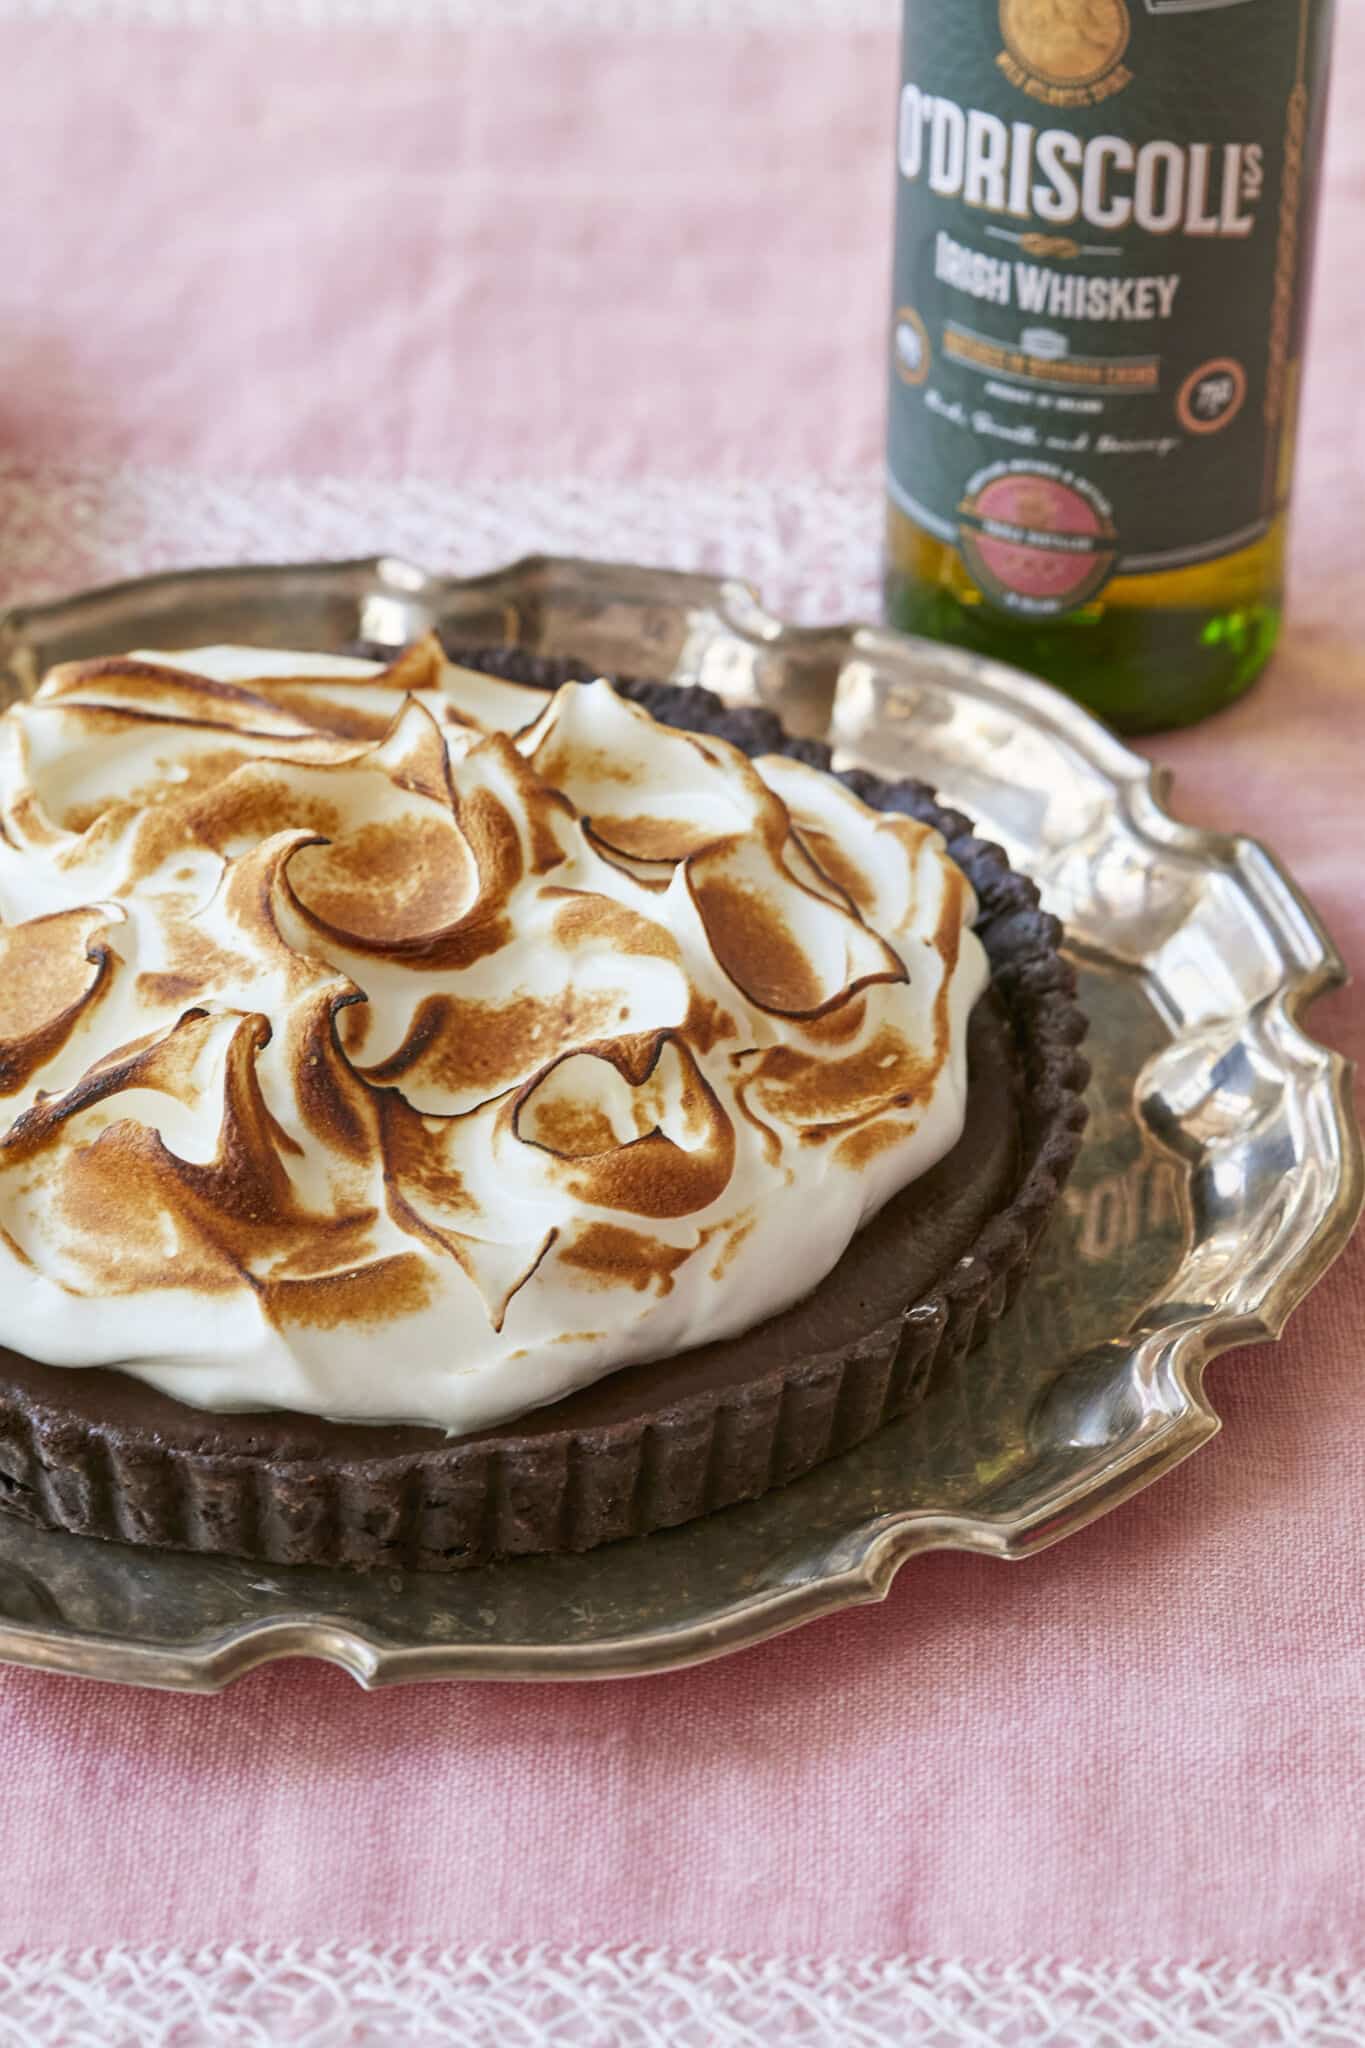 Irresistible Whiskey Chocolate Meringue Tart is served on a silver platter. It has decadent chocolate crust, rich and smooth chocolate filling, topped with velvety toasted meringue. 